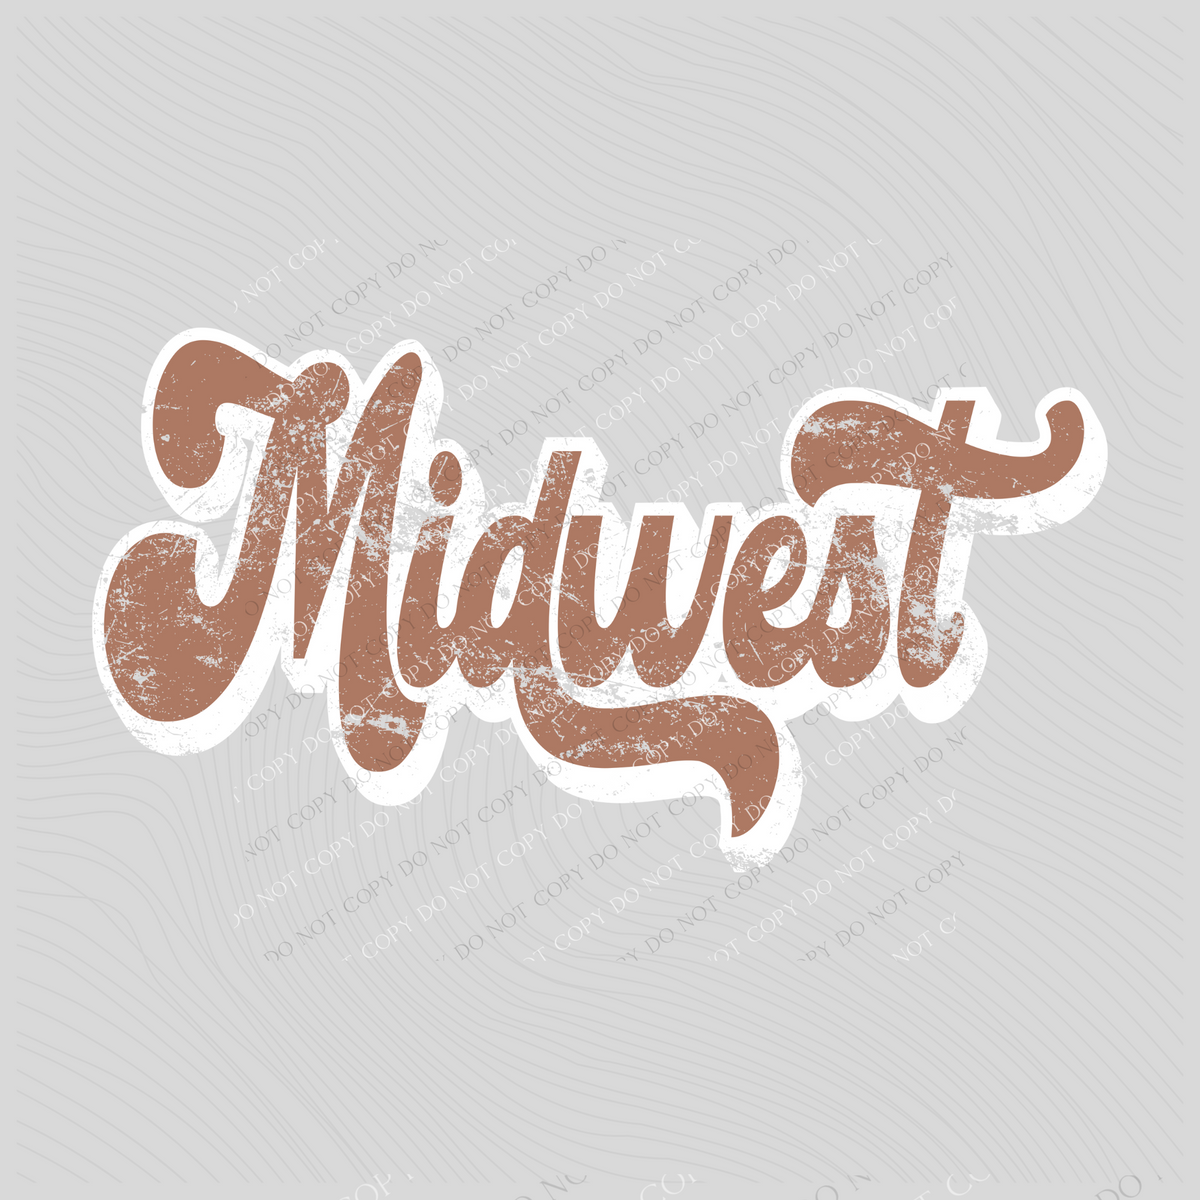 Midwest Chestnut & White Retro Shadow Distressed Digital Download, PNG